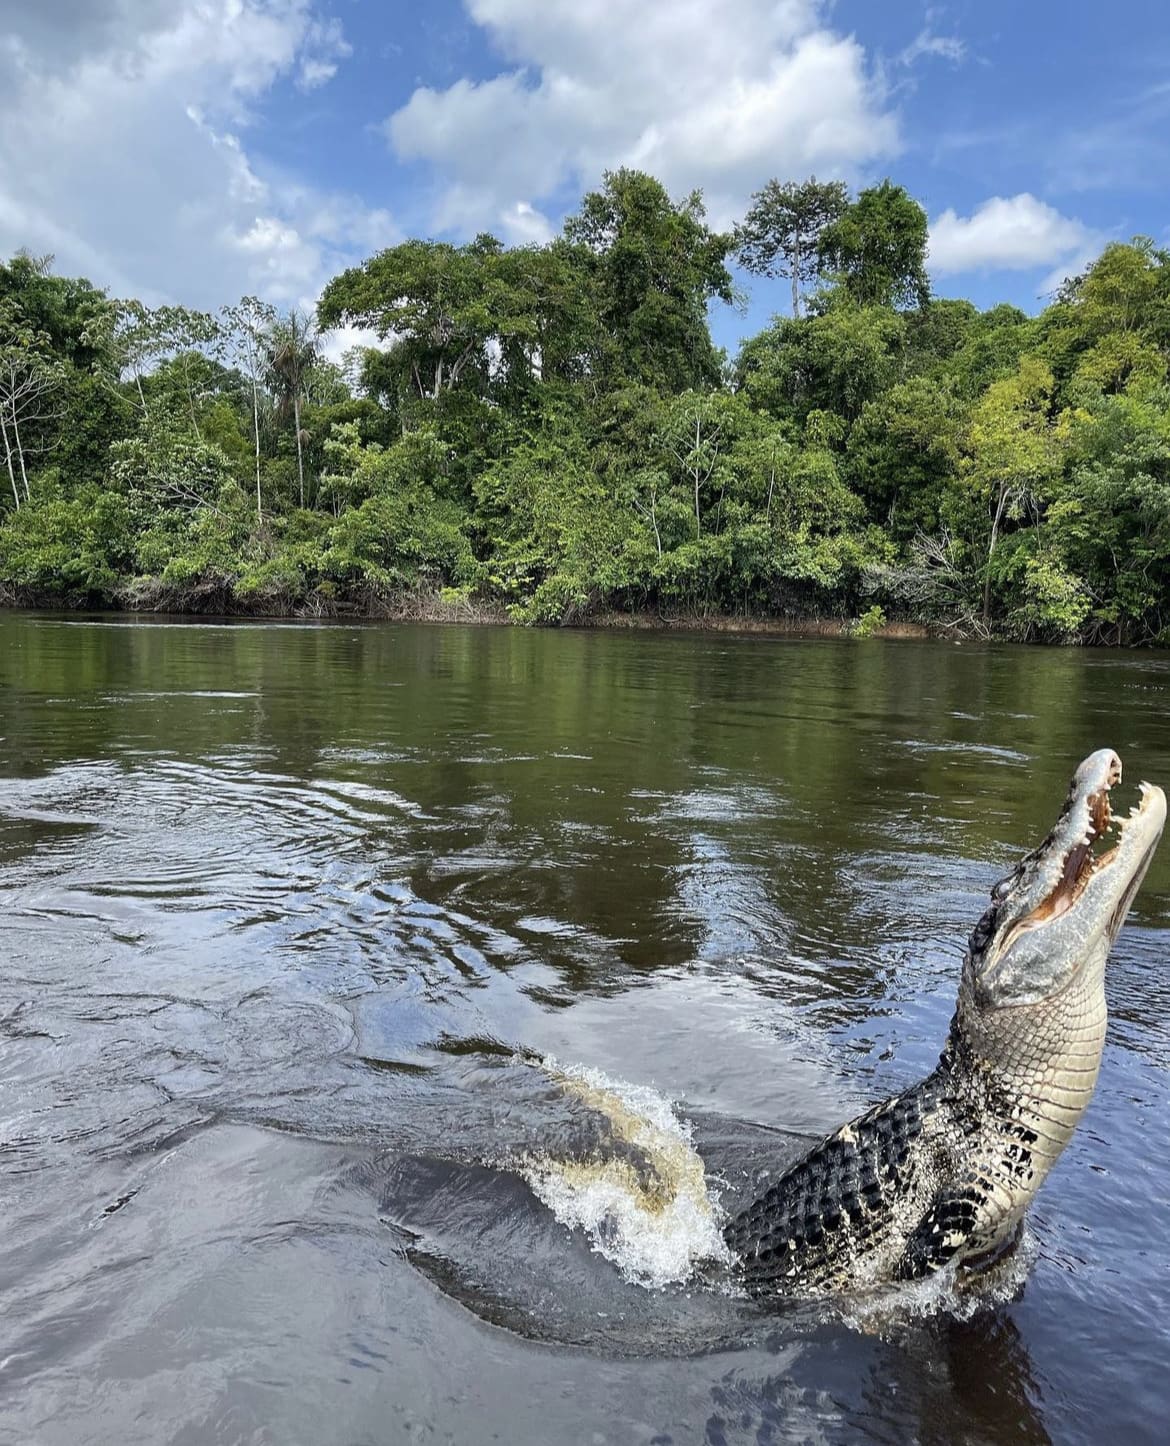 Caiman jumping out the river